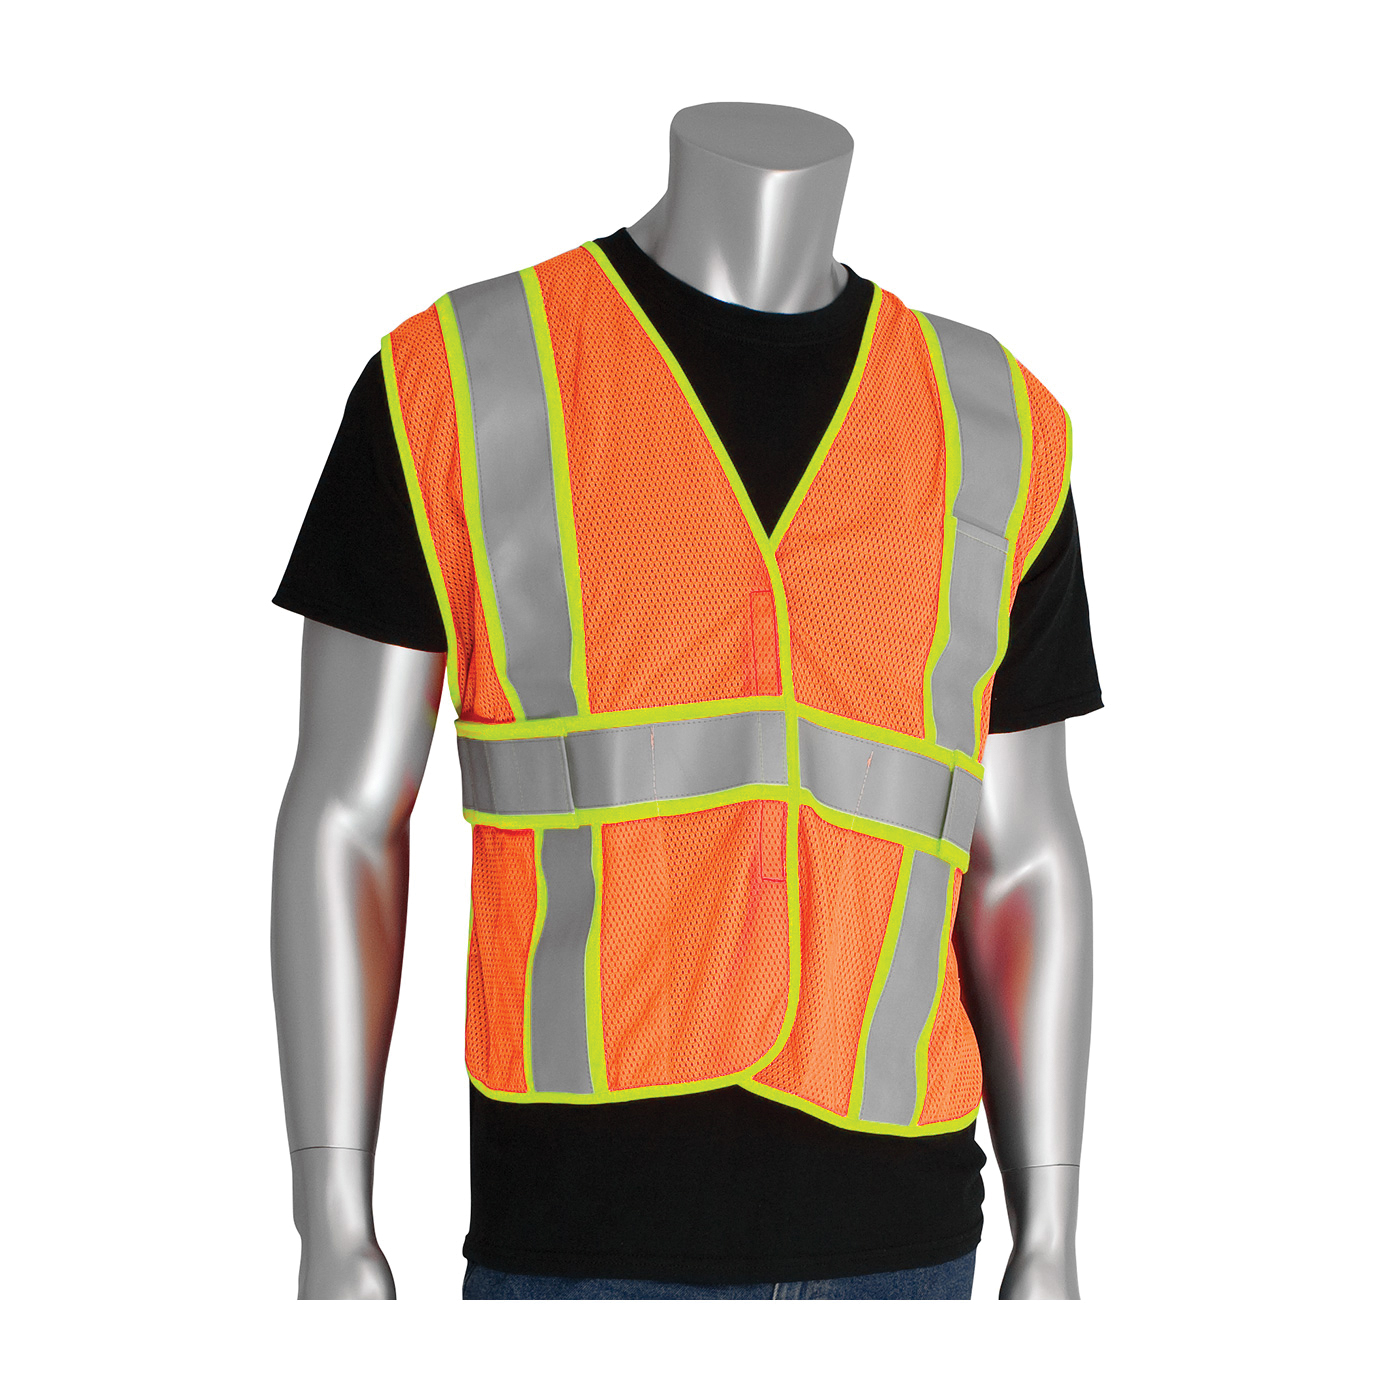 PIP® SafetyGear 305-USV5FROR FR Treated Expandable Safety Vest, Universal, Hi-Viz Orange, Polyester, Hook and Loop Closure, 2 Pockets, ANSI Class: Class 2, Specifications Met: ANSI/ISEA 107